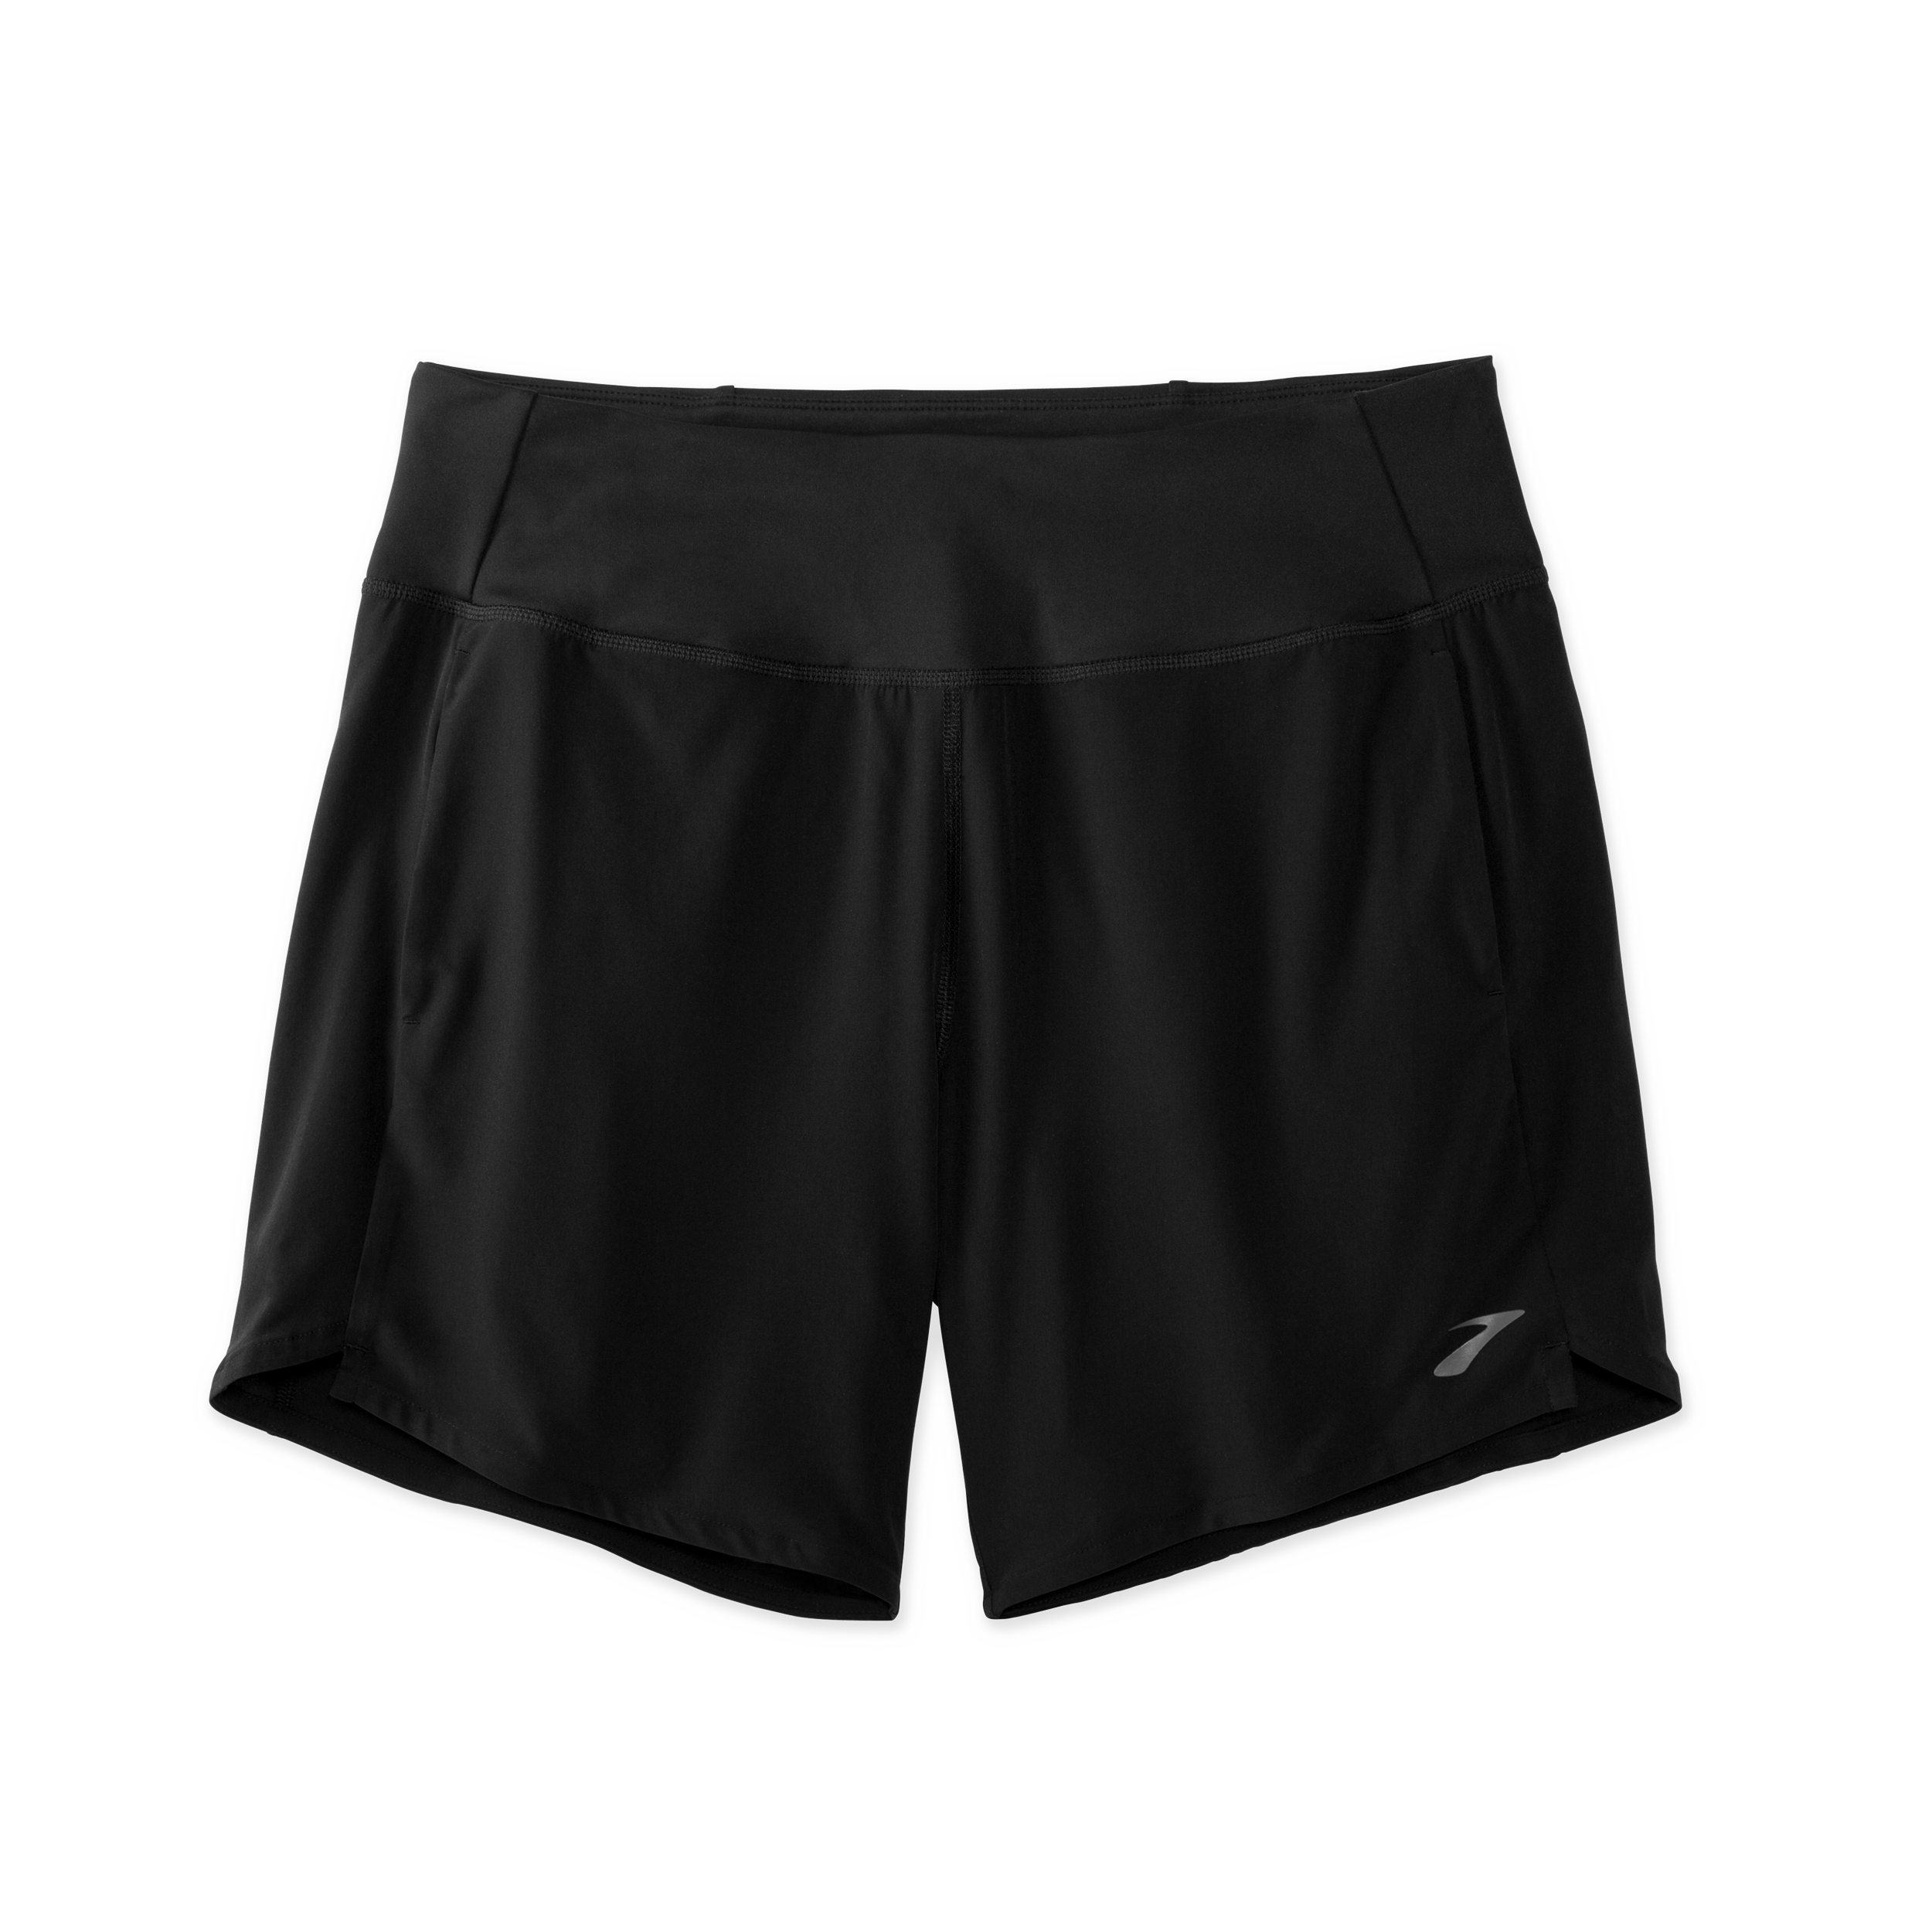 Chaser Women's 7 inch Running Shorts with Liner